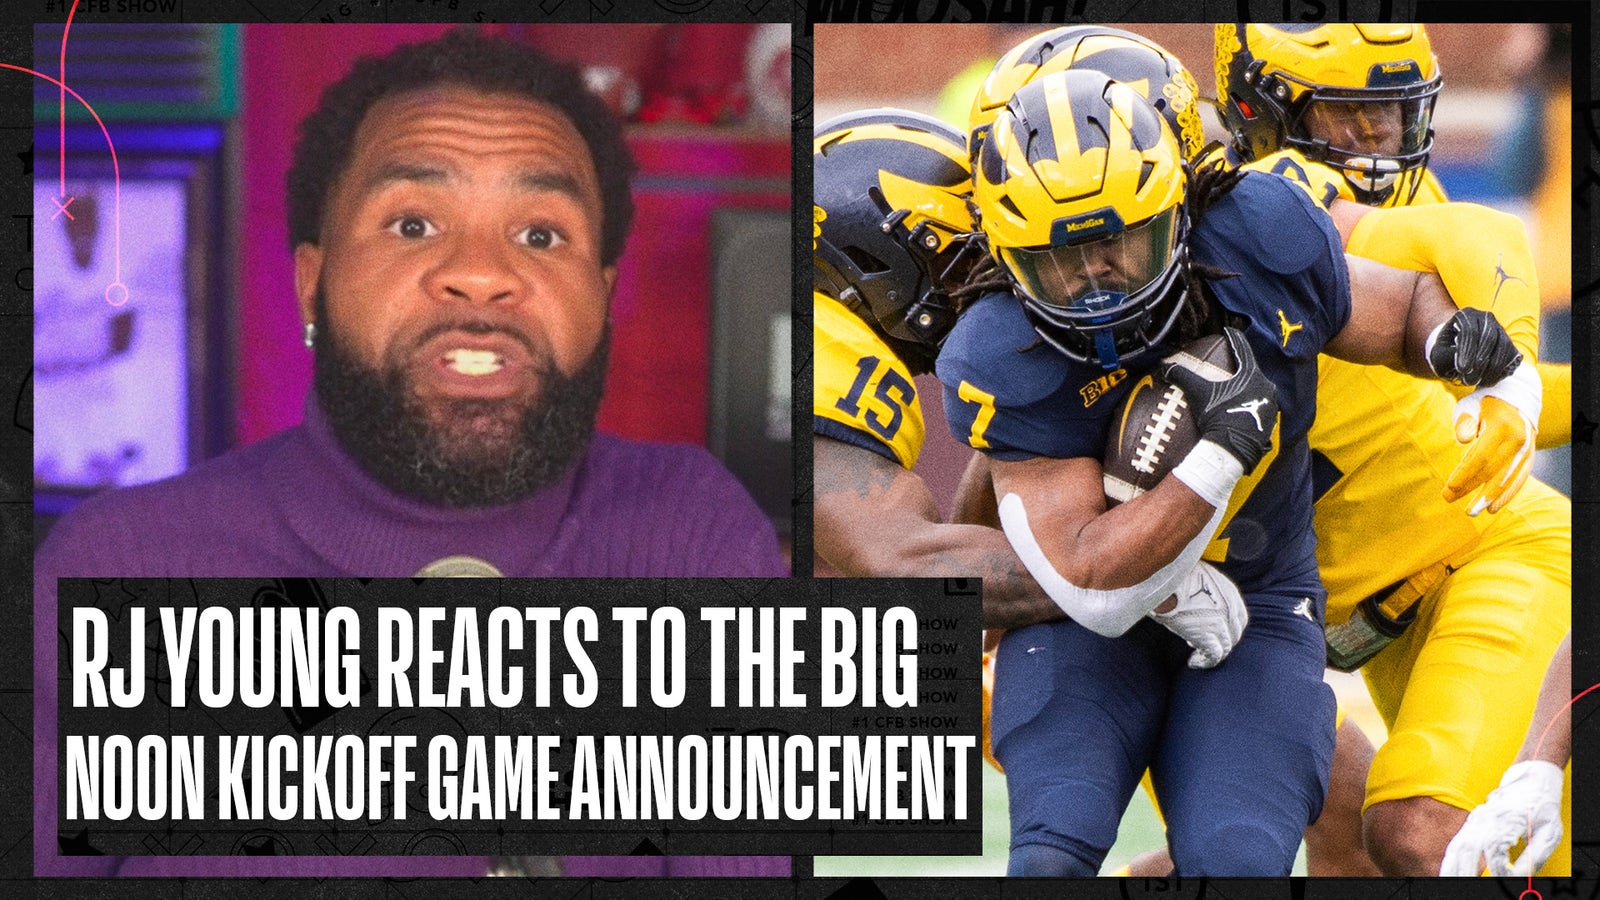 RJ Young reacts to the Big Noon Kickoff game announcement schedule